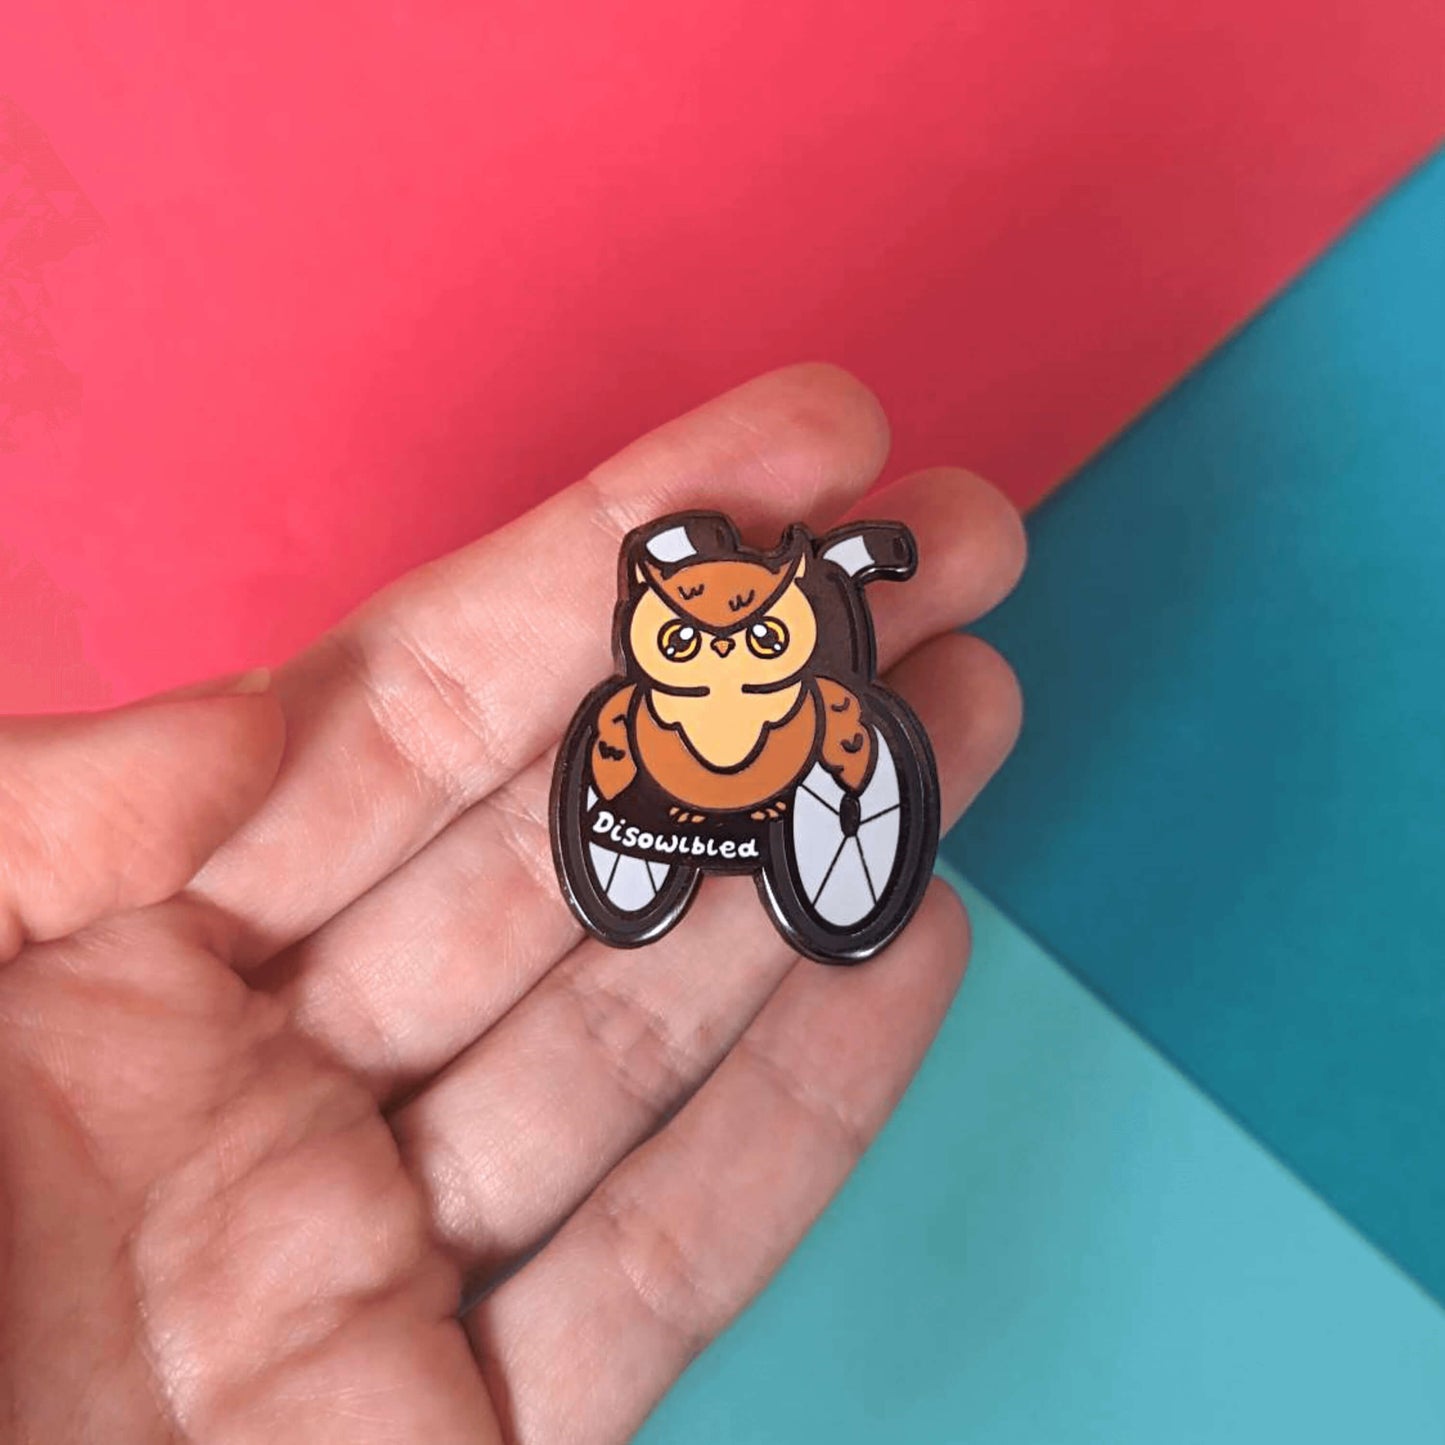 The Disowlbled Enamel Pin - Disabled being held over a red and blue background. A brown tawny owl with yellow eyes sat on a silver and black wheelchair that has white text reading 'disowlbled'. The design is raising awareness for disabilities and invisible illnesses.